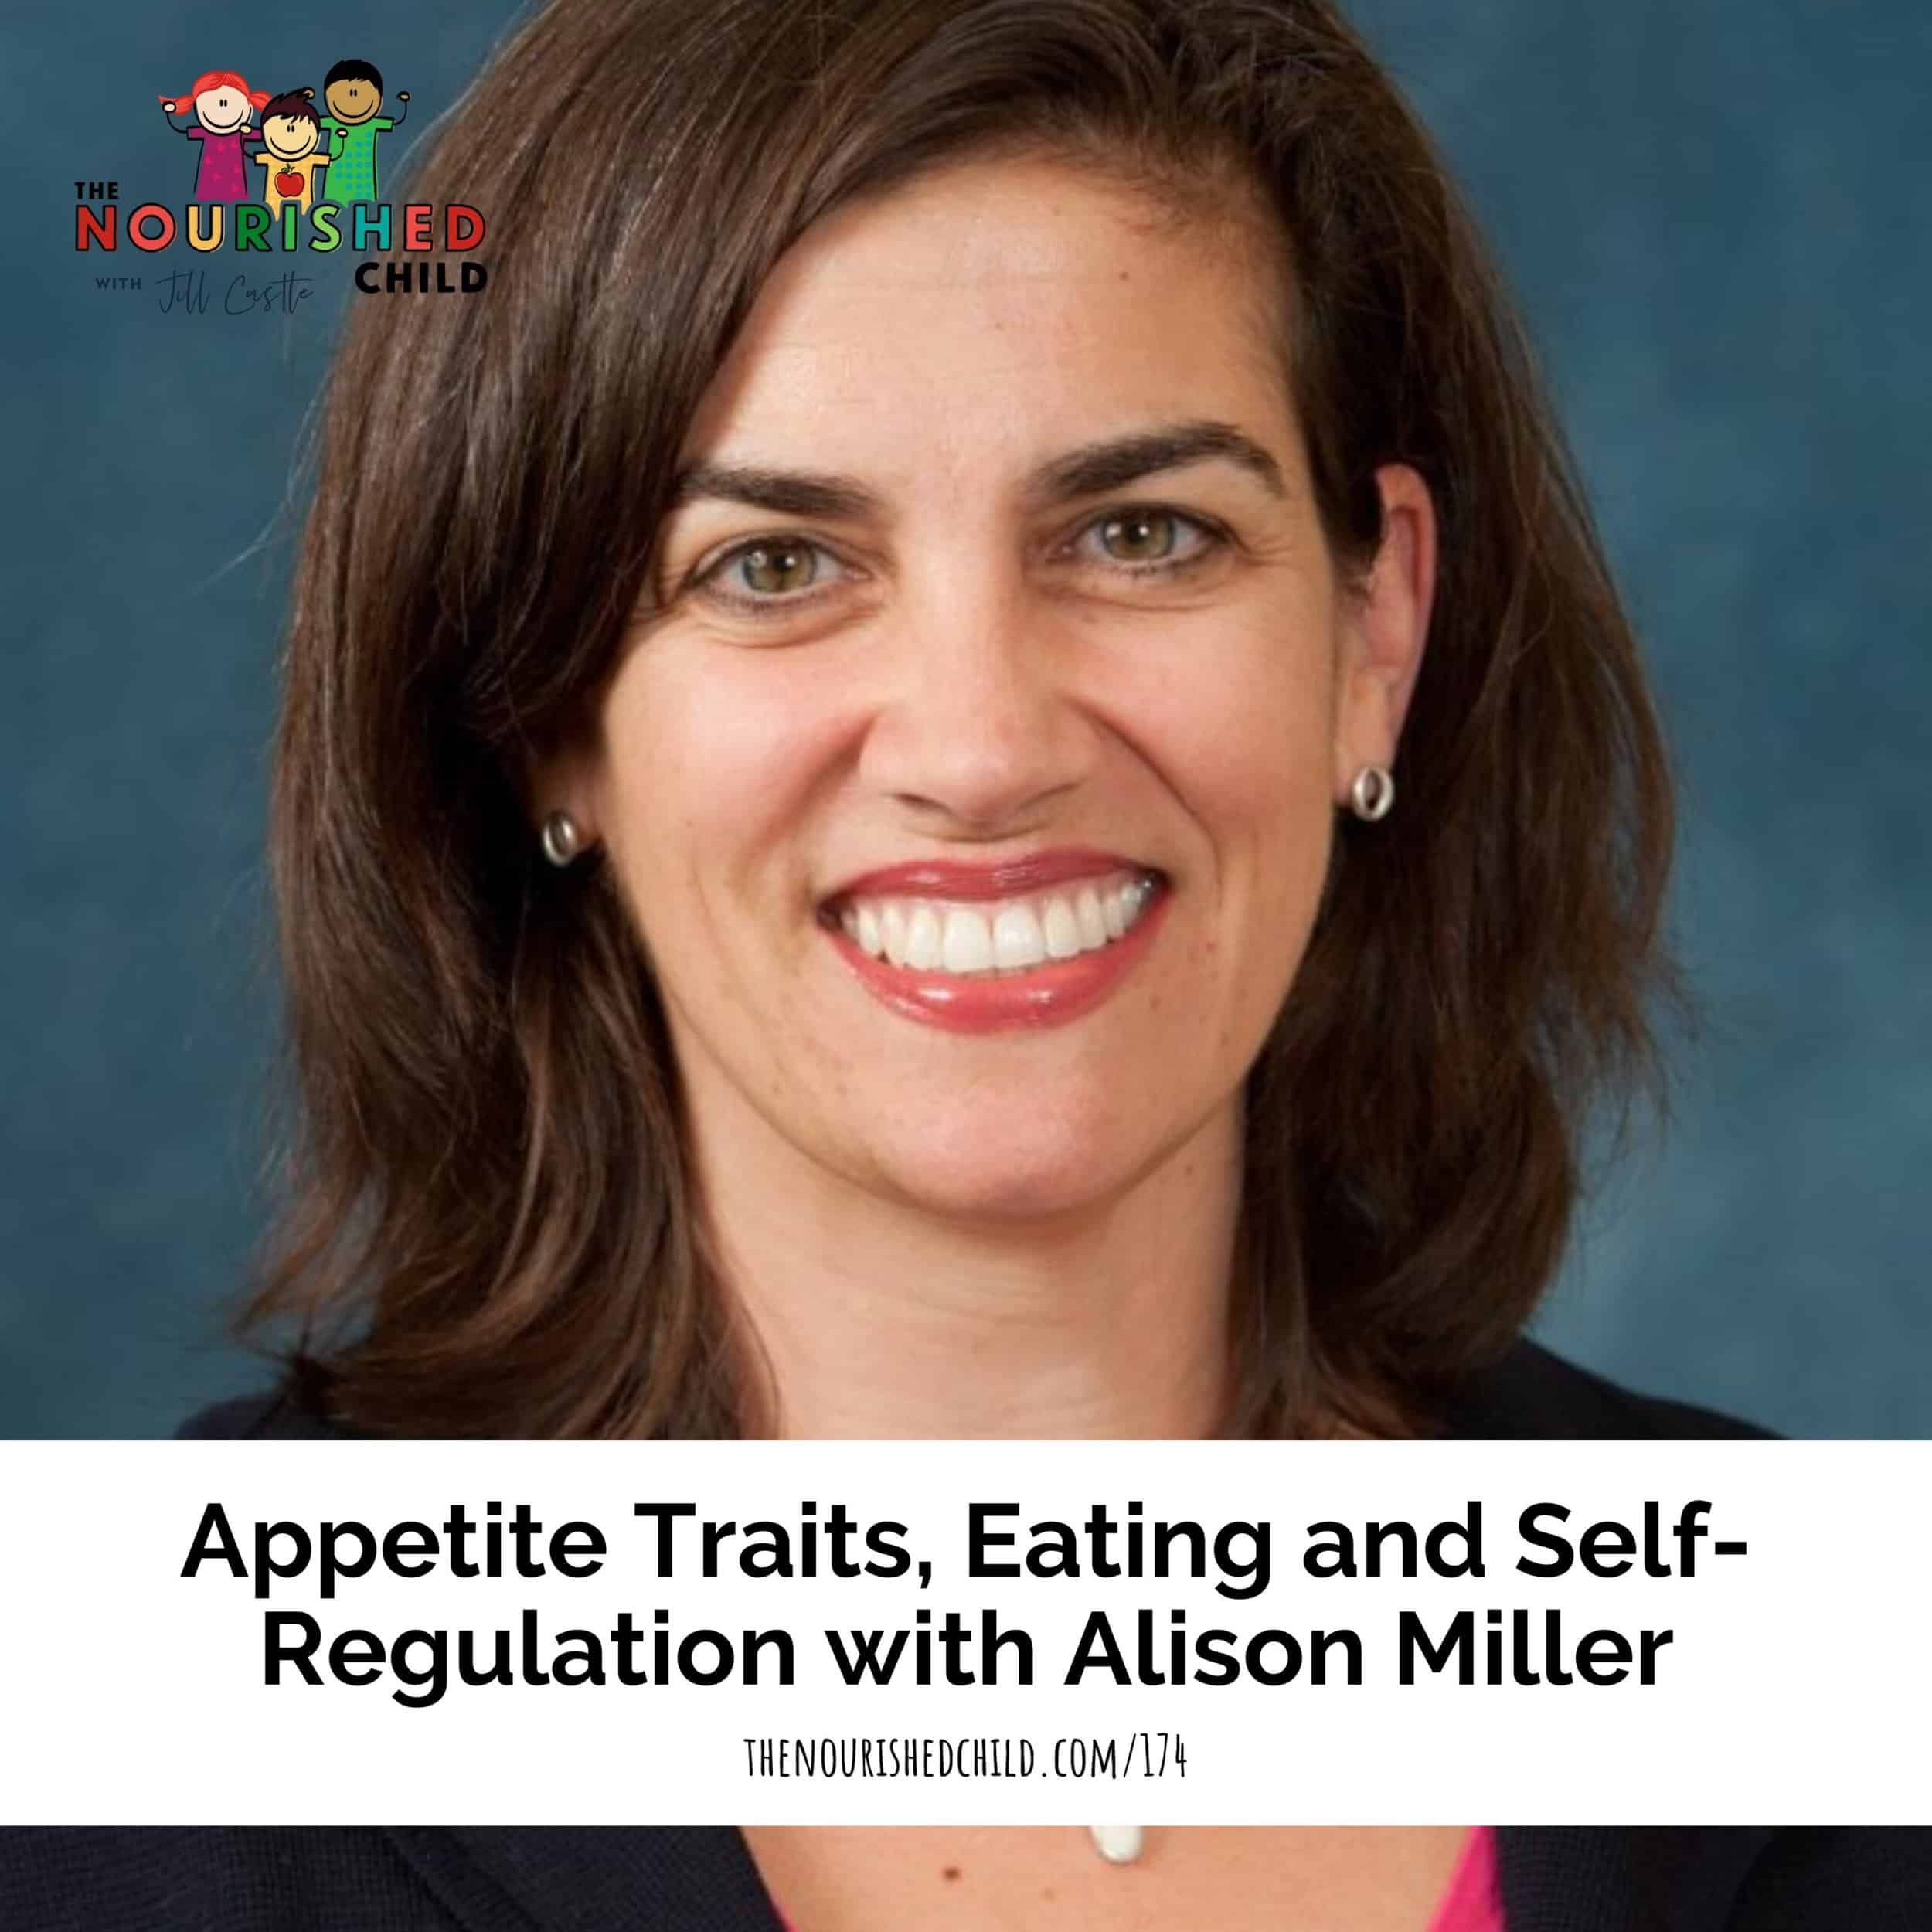 alison miller on the nourished child podcast